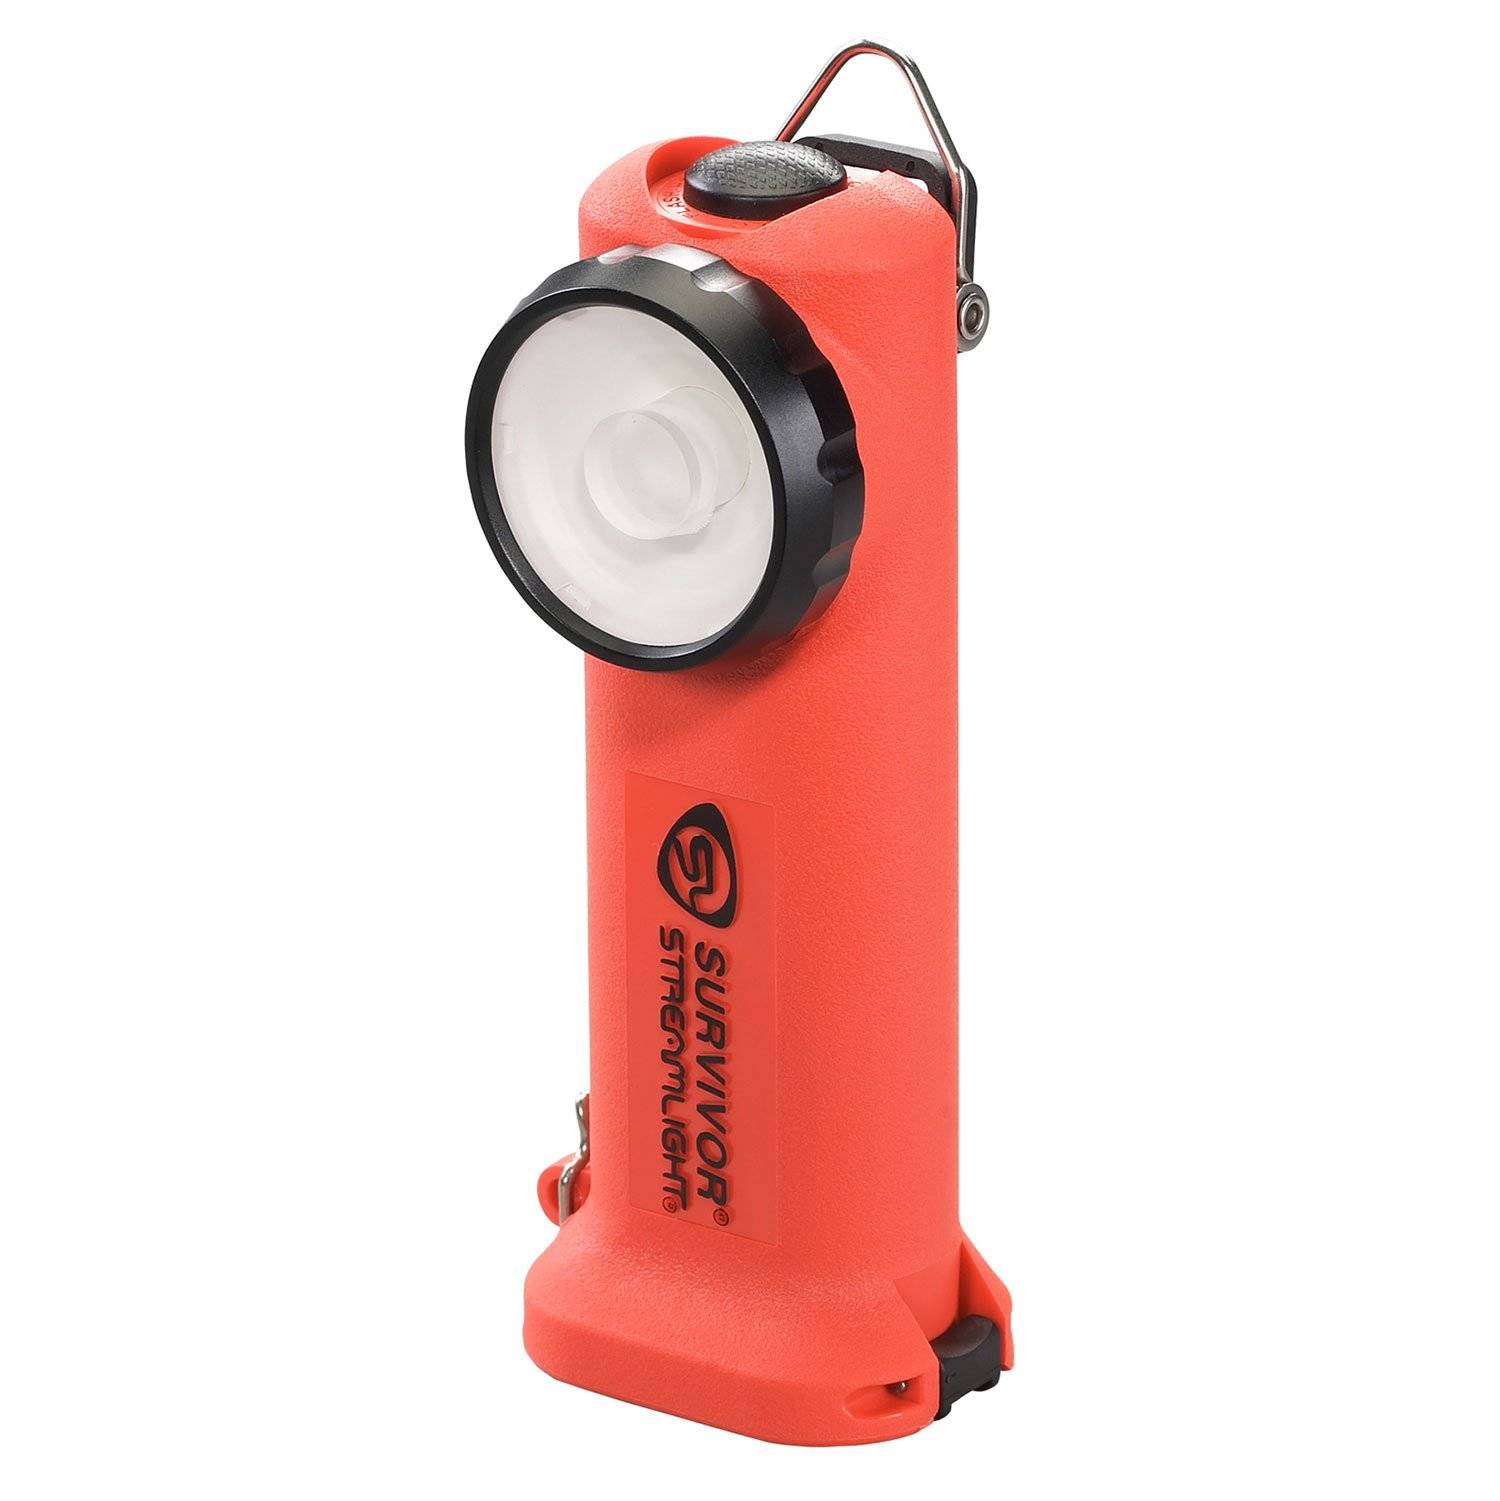 STREAMLIGHT SURVIVOR LED FLASHLIGHT WITH FAST CHARGER